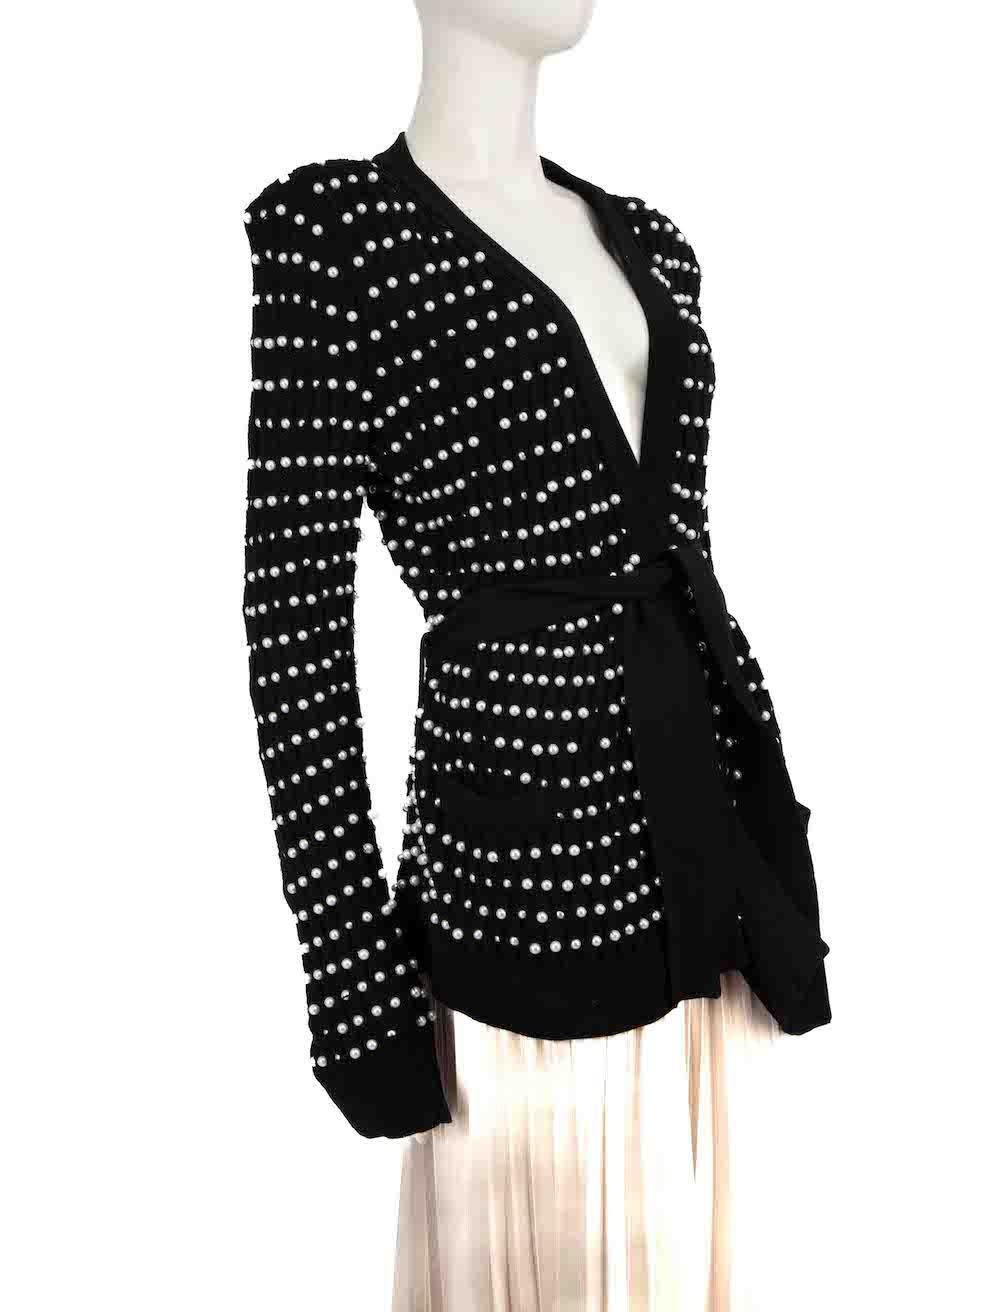 CONDITION is Very good. Minimal wear to cardigan is evident. Minimal wear to the embellishment with missing faux pearls on this used Balmain designer resale item.
 
 
 
 Details
 
 
 Black
 
 Synthetic
 
 Knit cardigan
 
 Faux peal embellished
 
